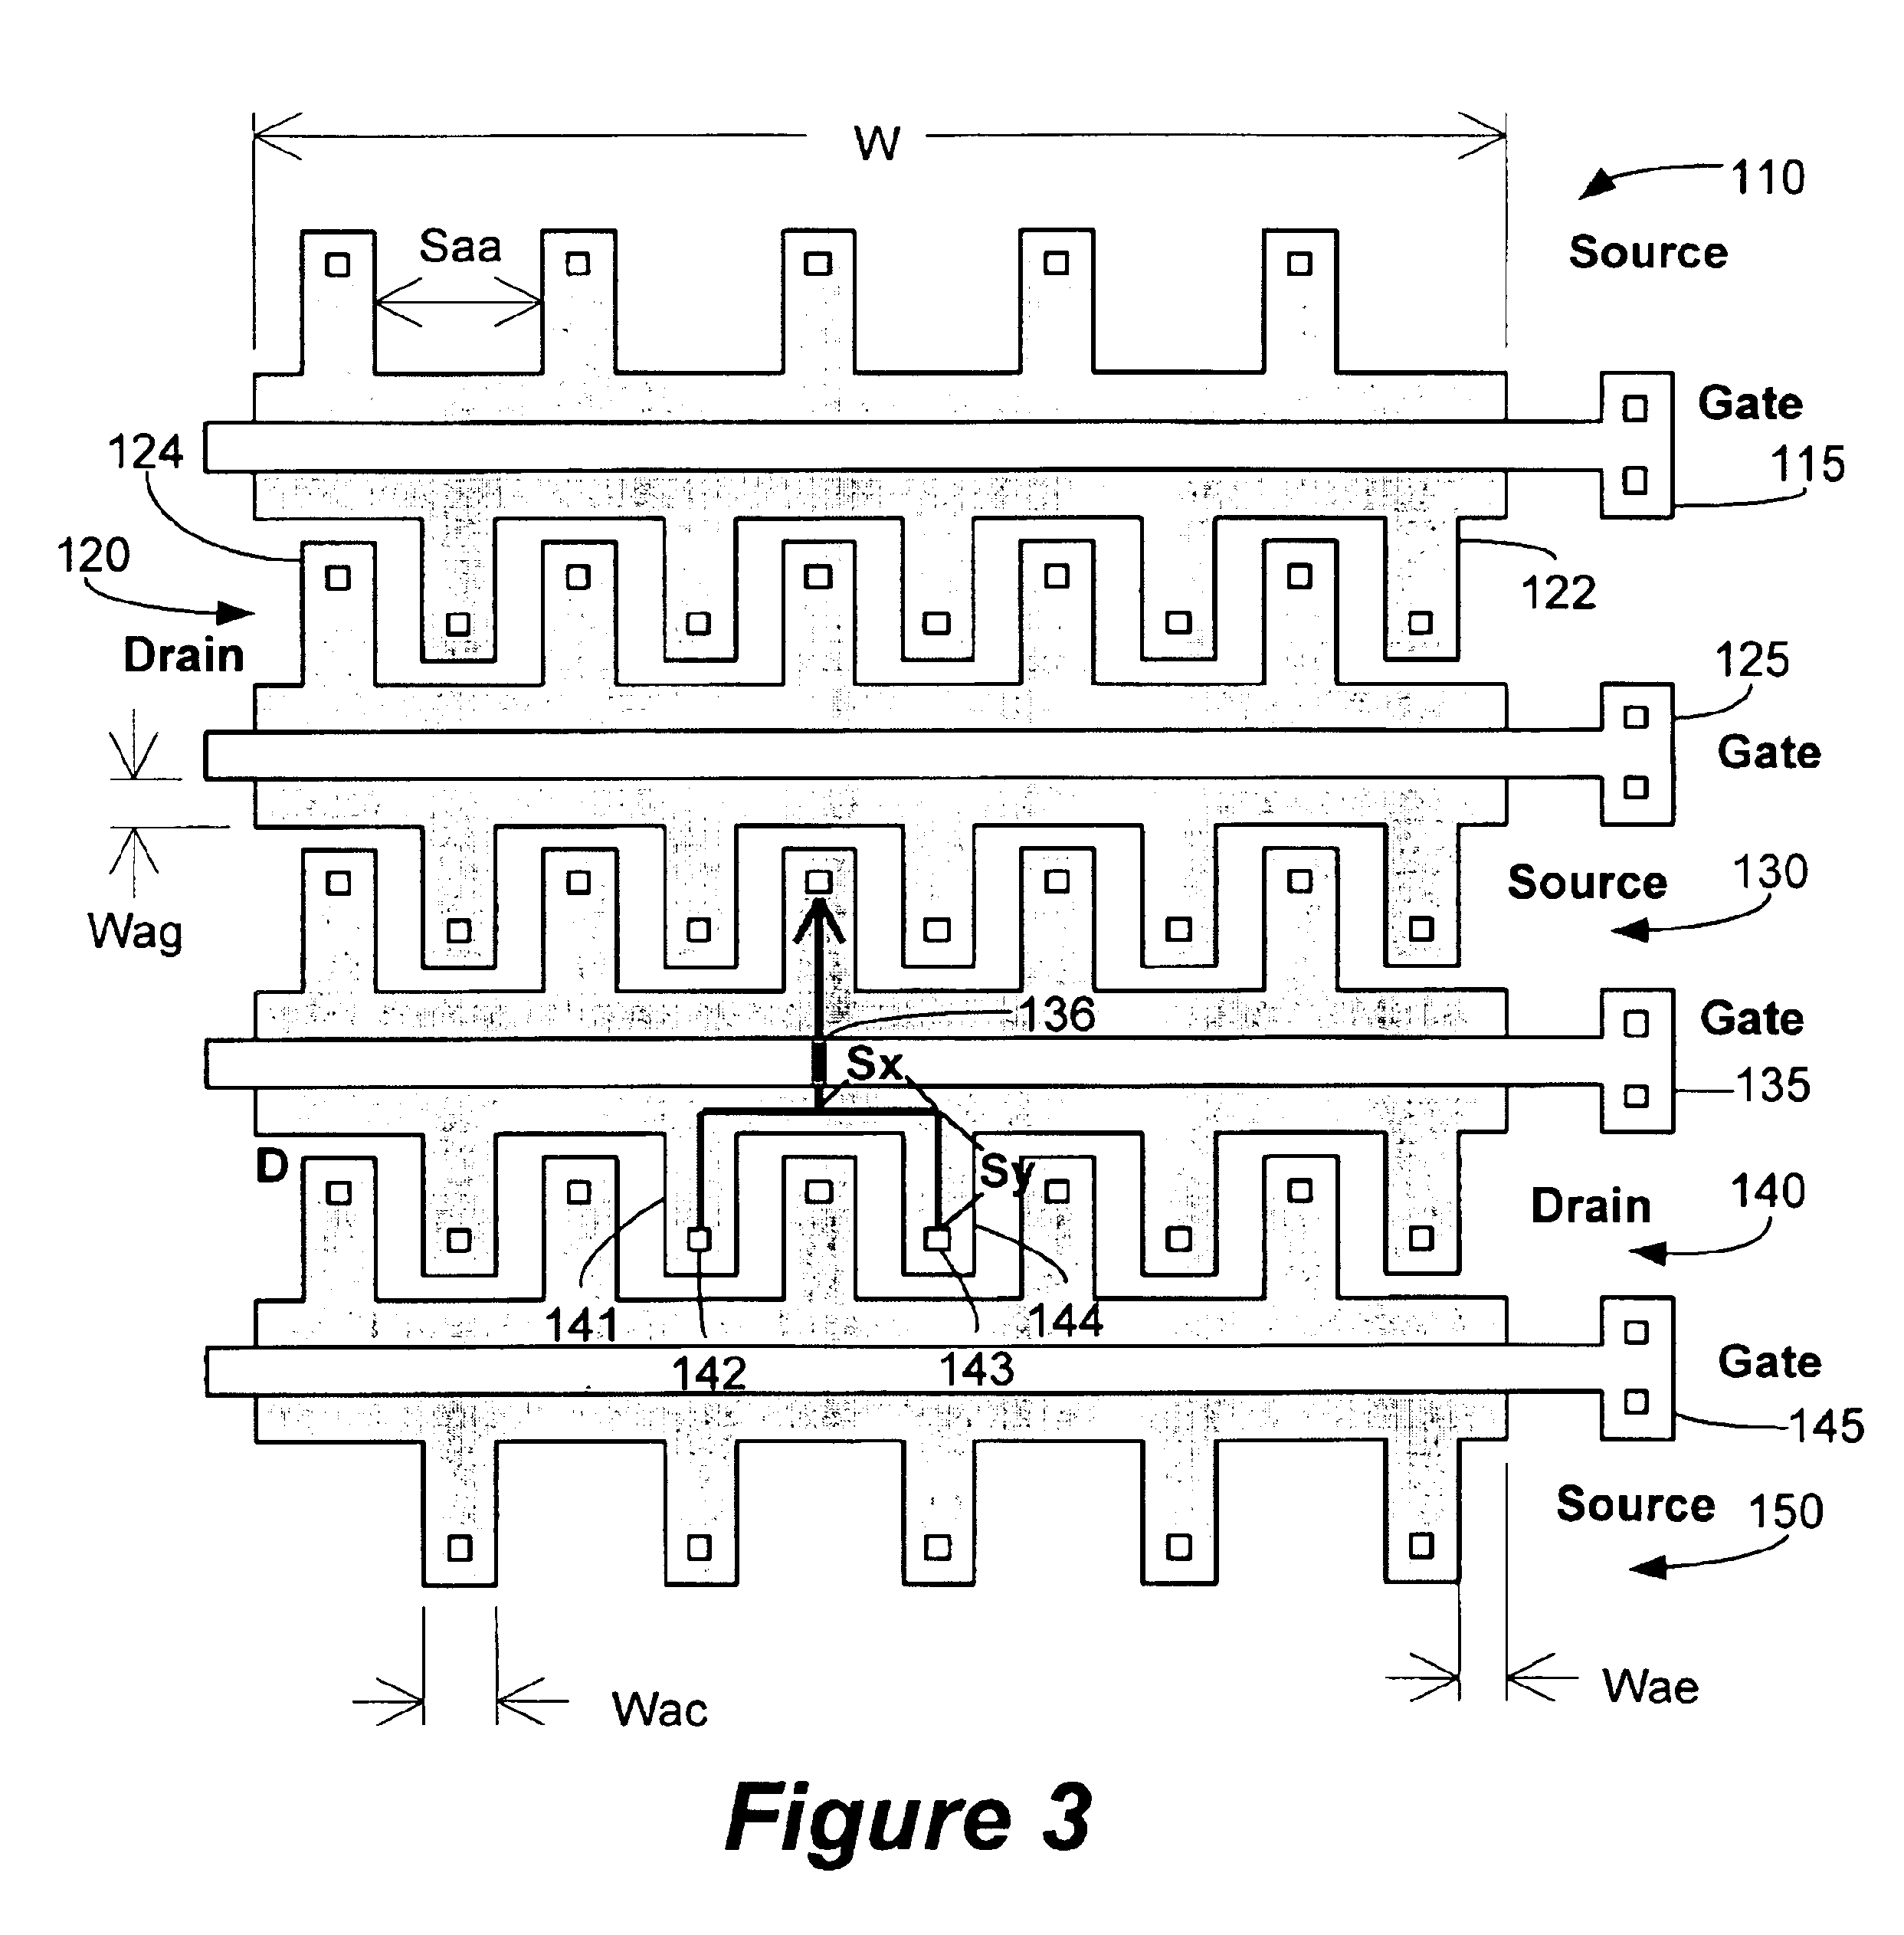 Ballasting MOSFETs using staggered and segmented diffusion regions